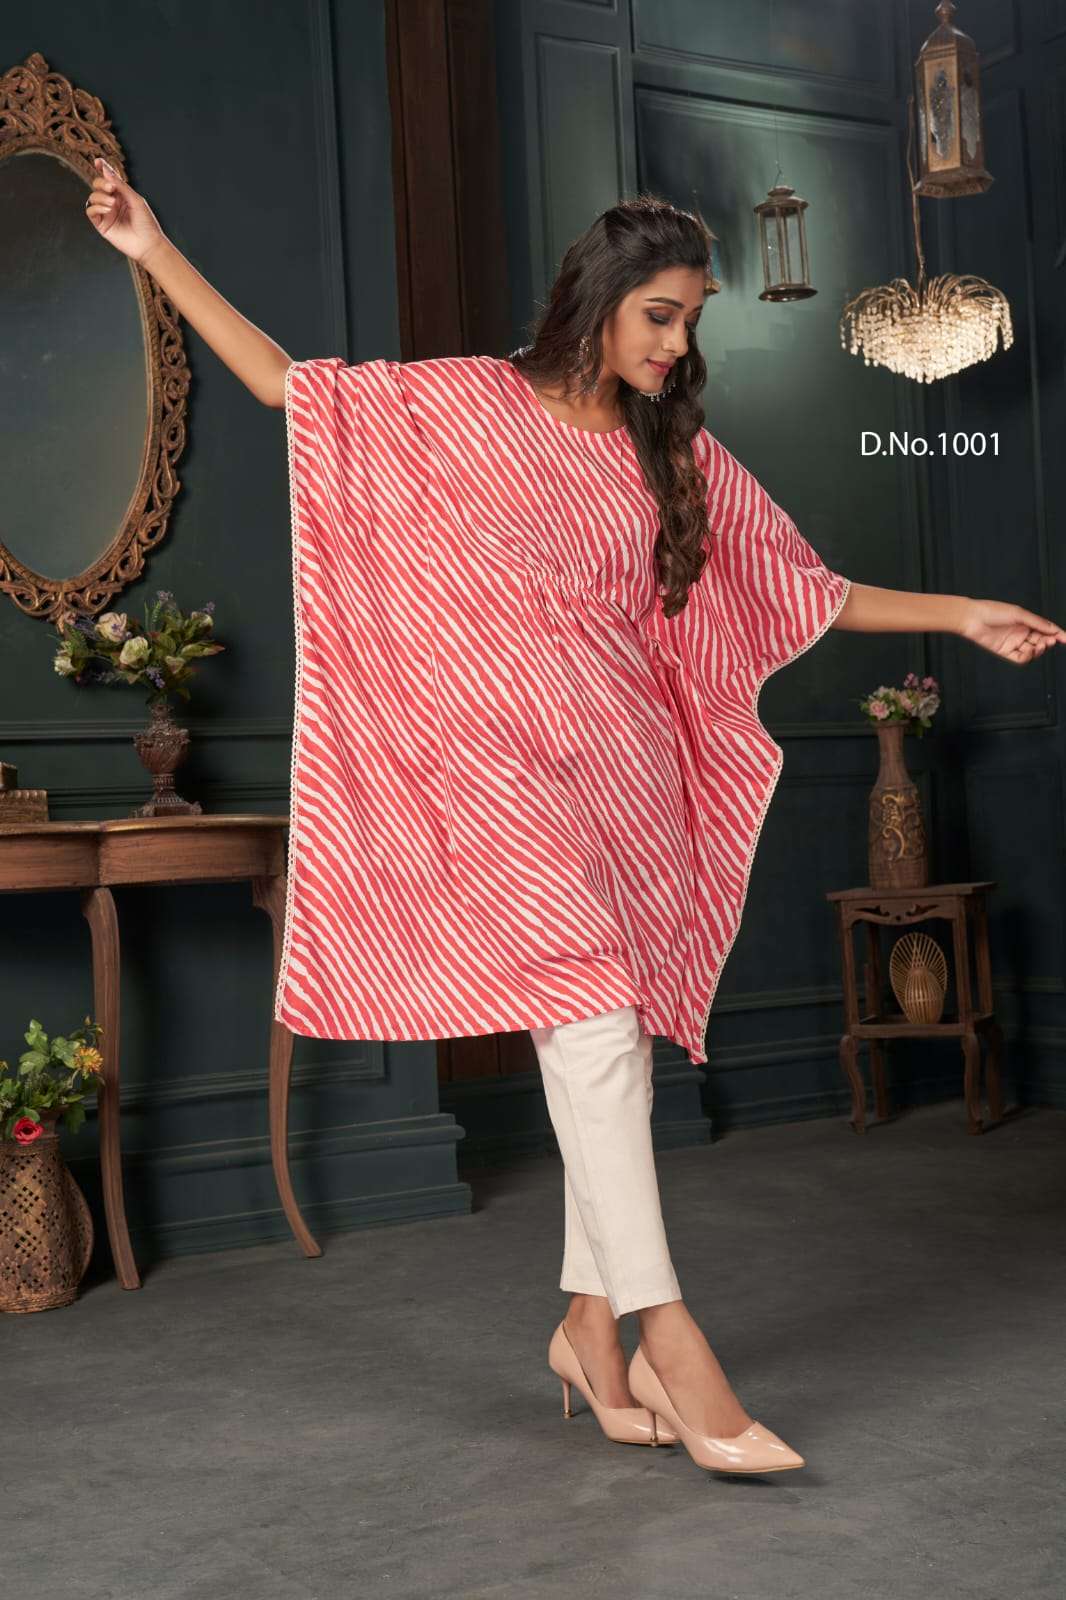 Banwery   Kaftans Cotton Print with Lace Border Readymade Kurti in wholesale rate